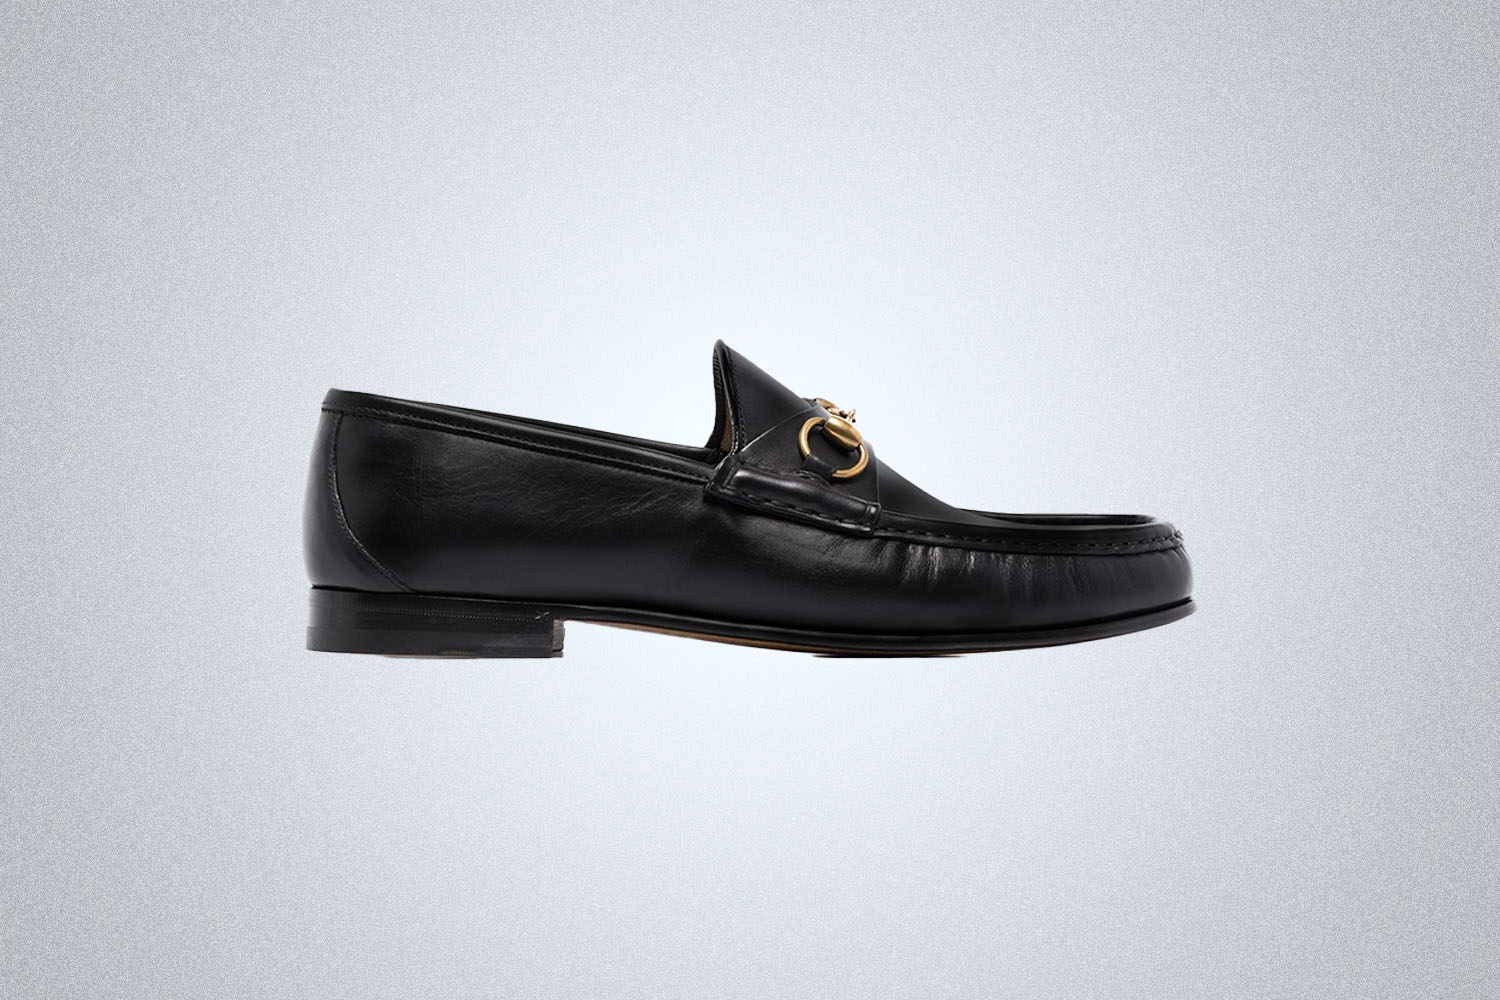 A pair of Summer Loafers from Gucci on a grey background